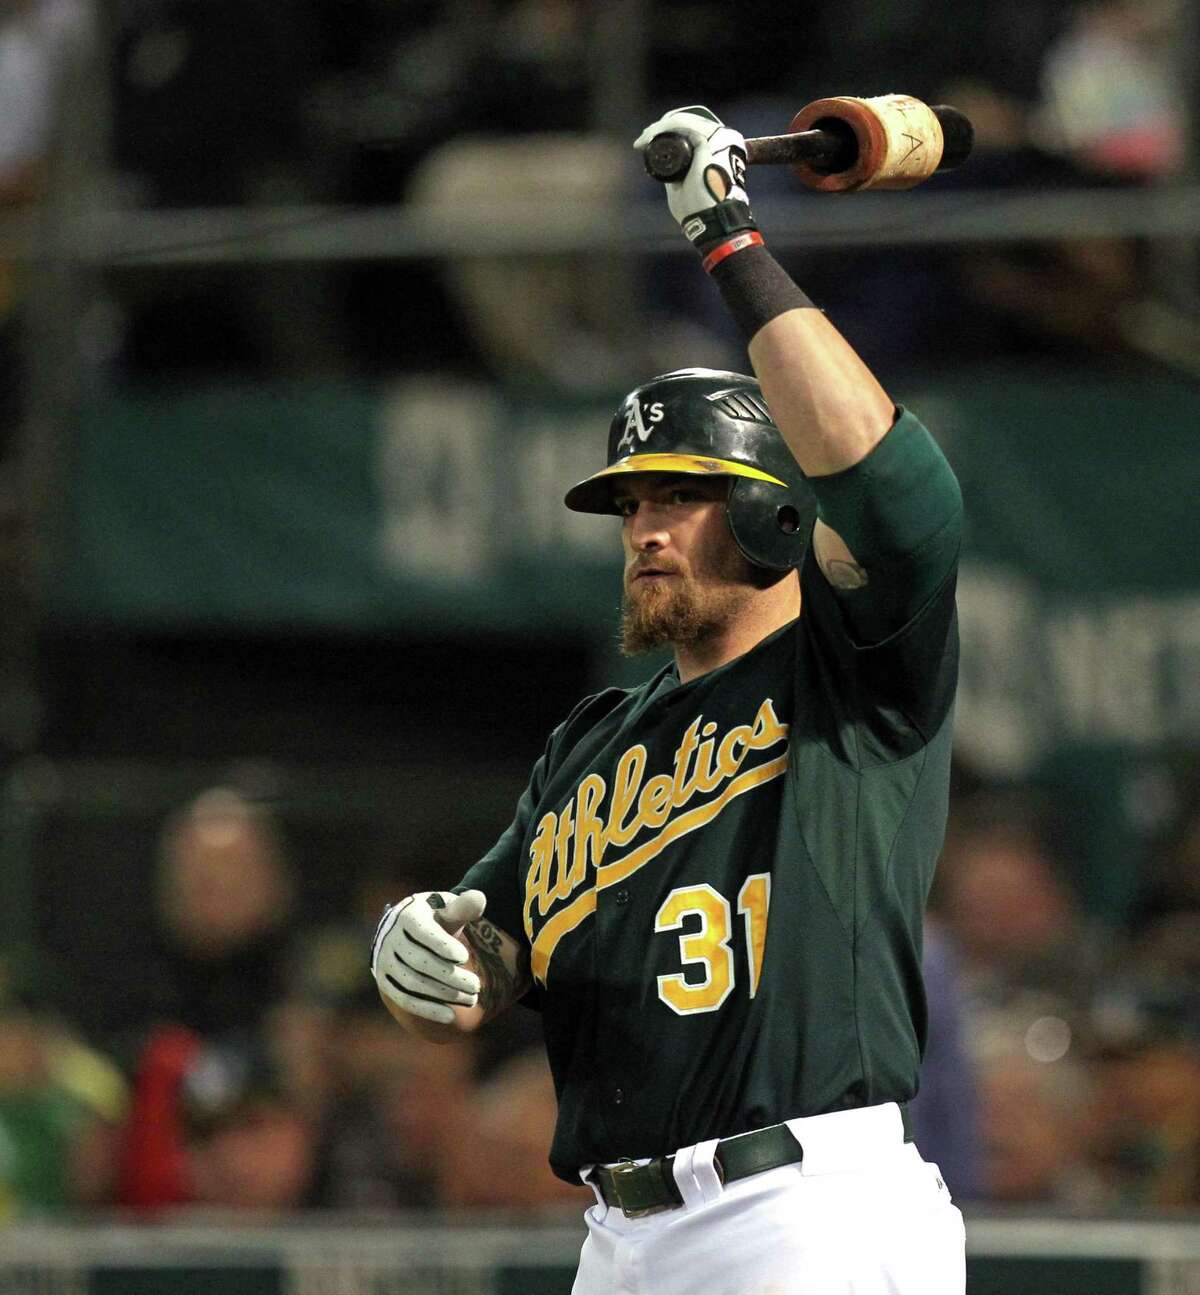 Former A’s outfielder Jonny Gomes, a Petaluma native, will hit the road as part of MLB’s home run derby tour this summer.